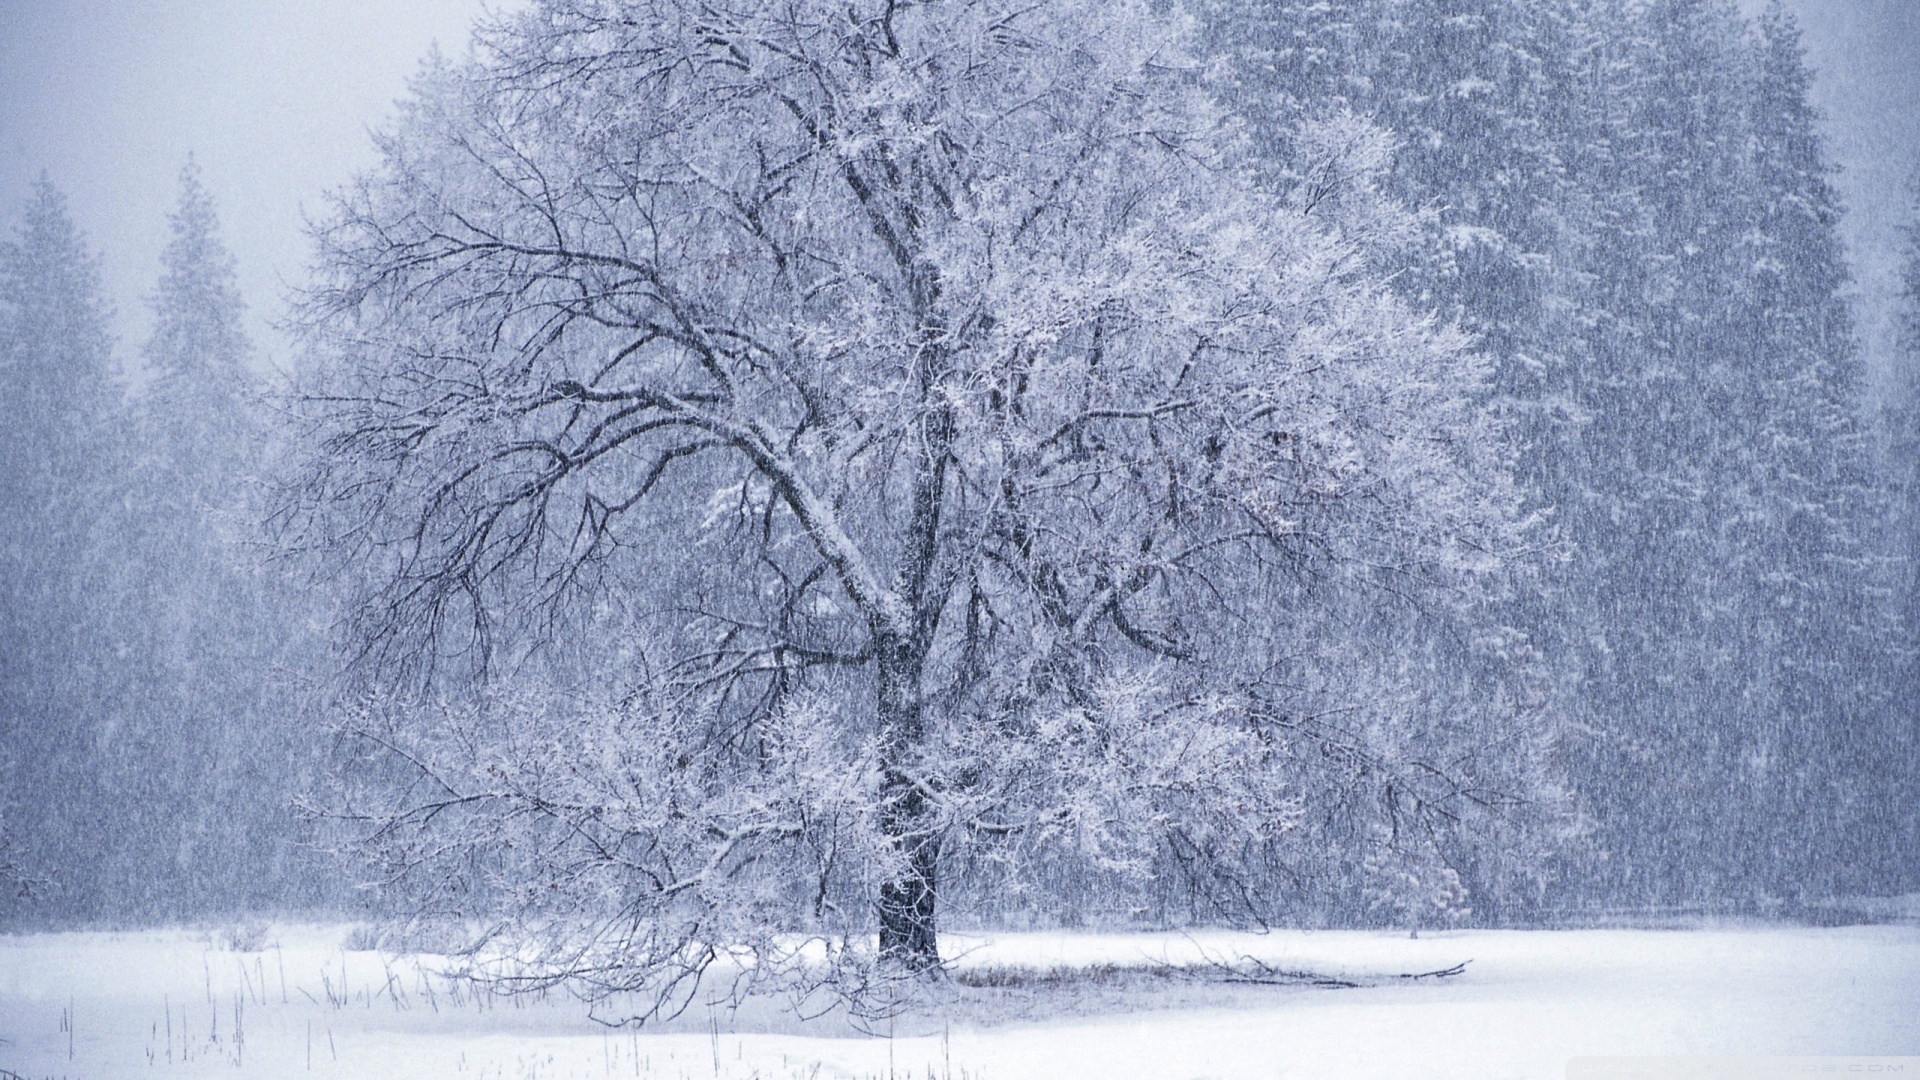 animated winter snow scene with snow falling on trees MEMES 1920x1080